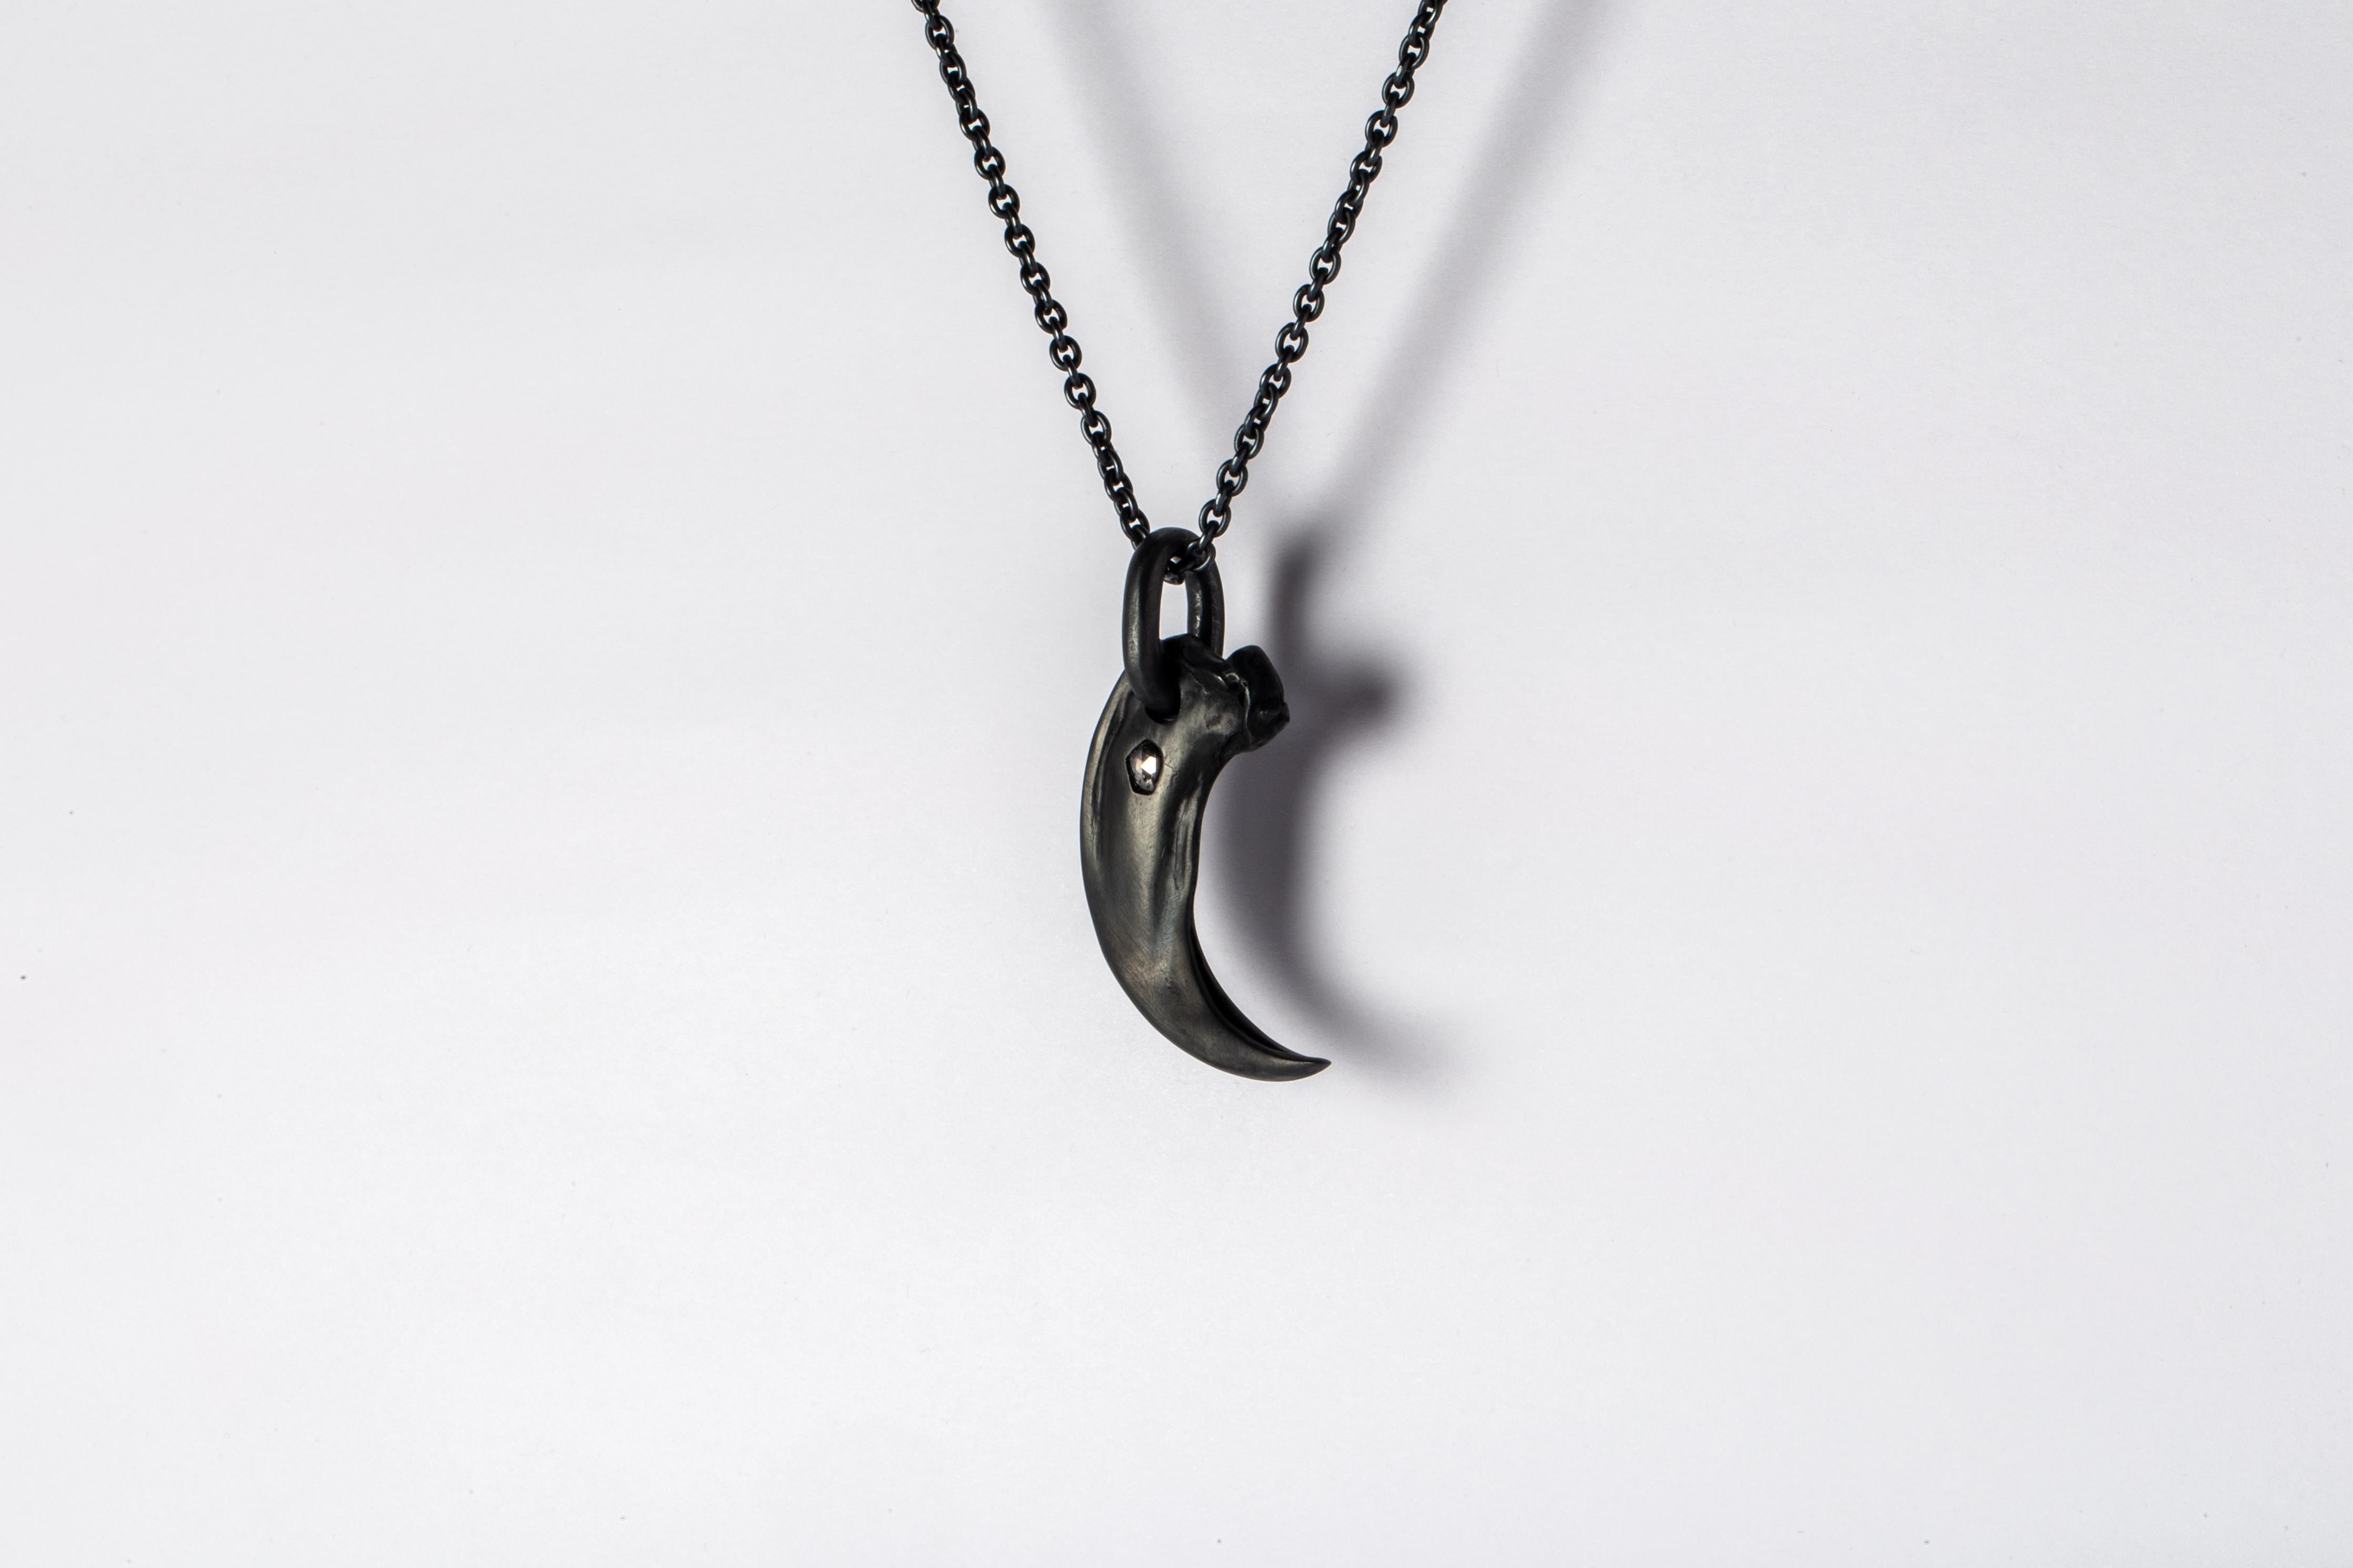 Pendant necklace in the shape of a bear claw in sterling silver and a slab of rough diamond. This slab is removed from a larger chunk of diamond, it comes on a 74cm chain. This item is made with a naturally occurring element and will vary from the